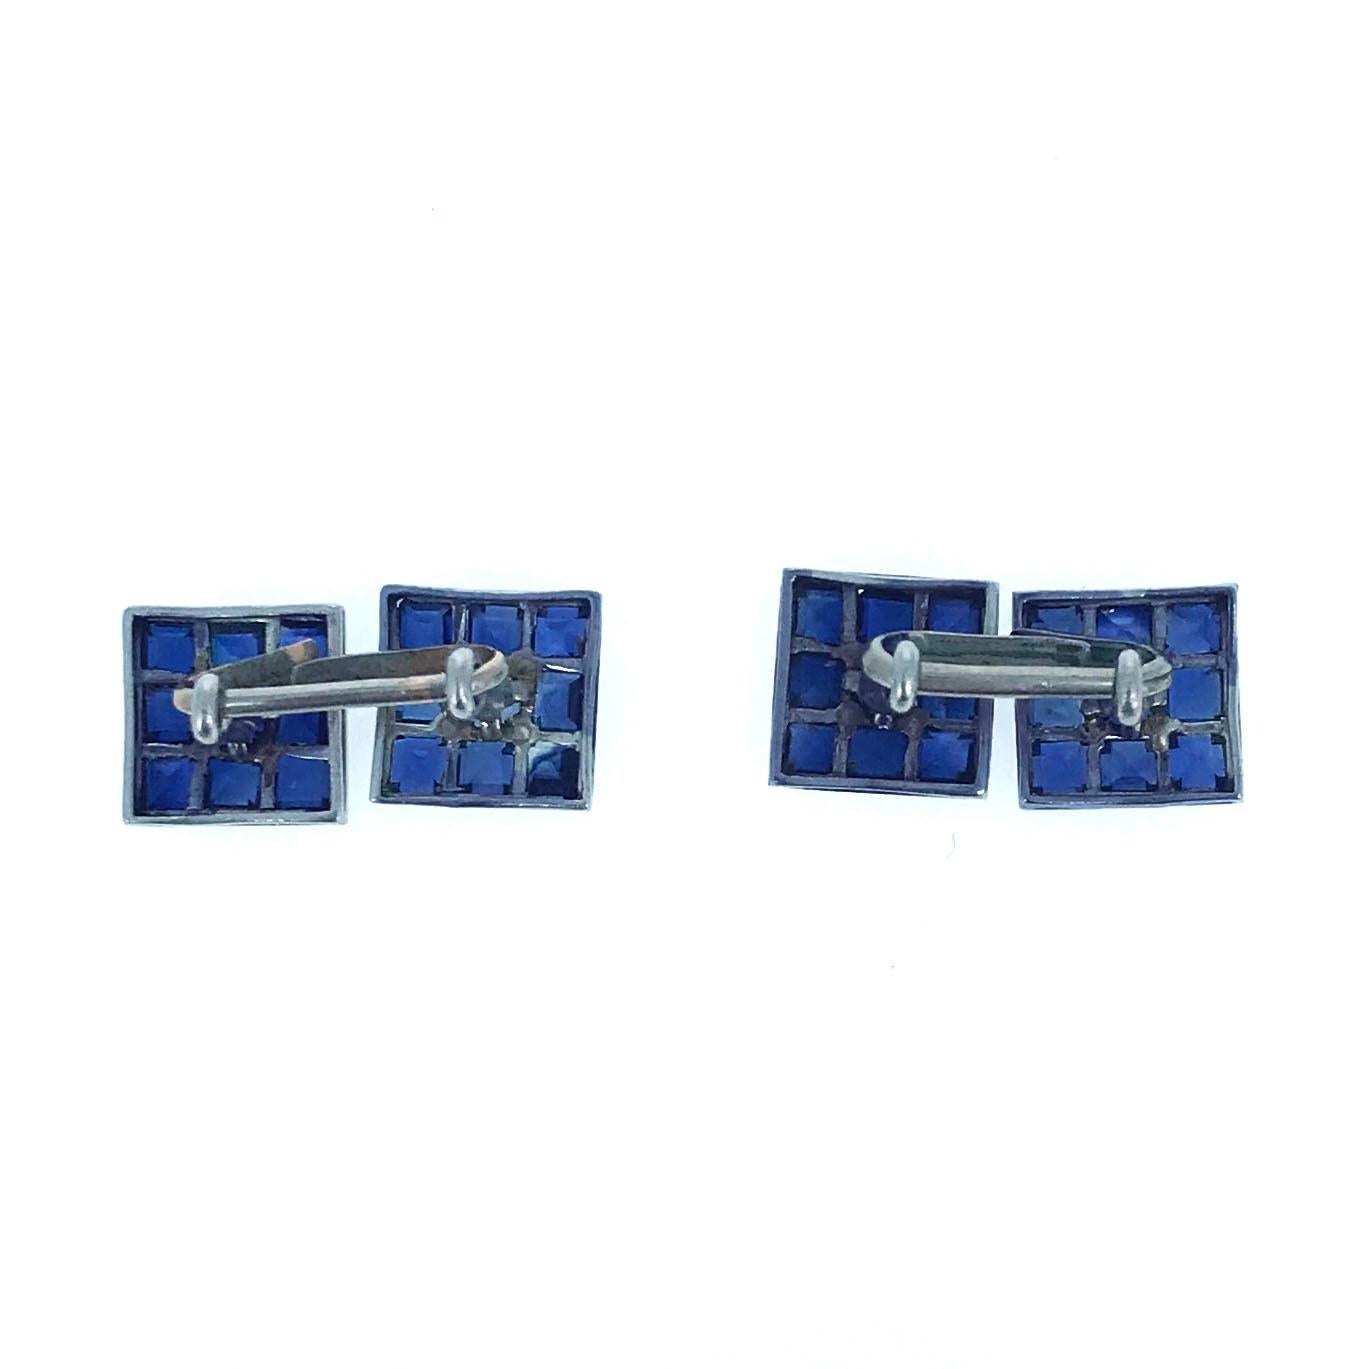 This pair of Art Deco cufflinks features 36 square-cut blue sapphires mounted in platinum. They were made circa 1925 and will add a refined look to any dress shirt.